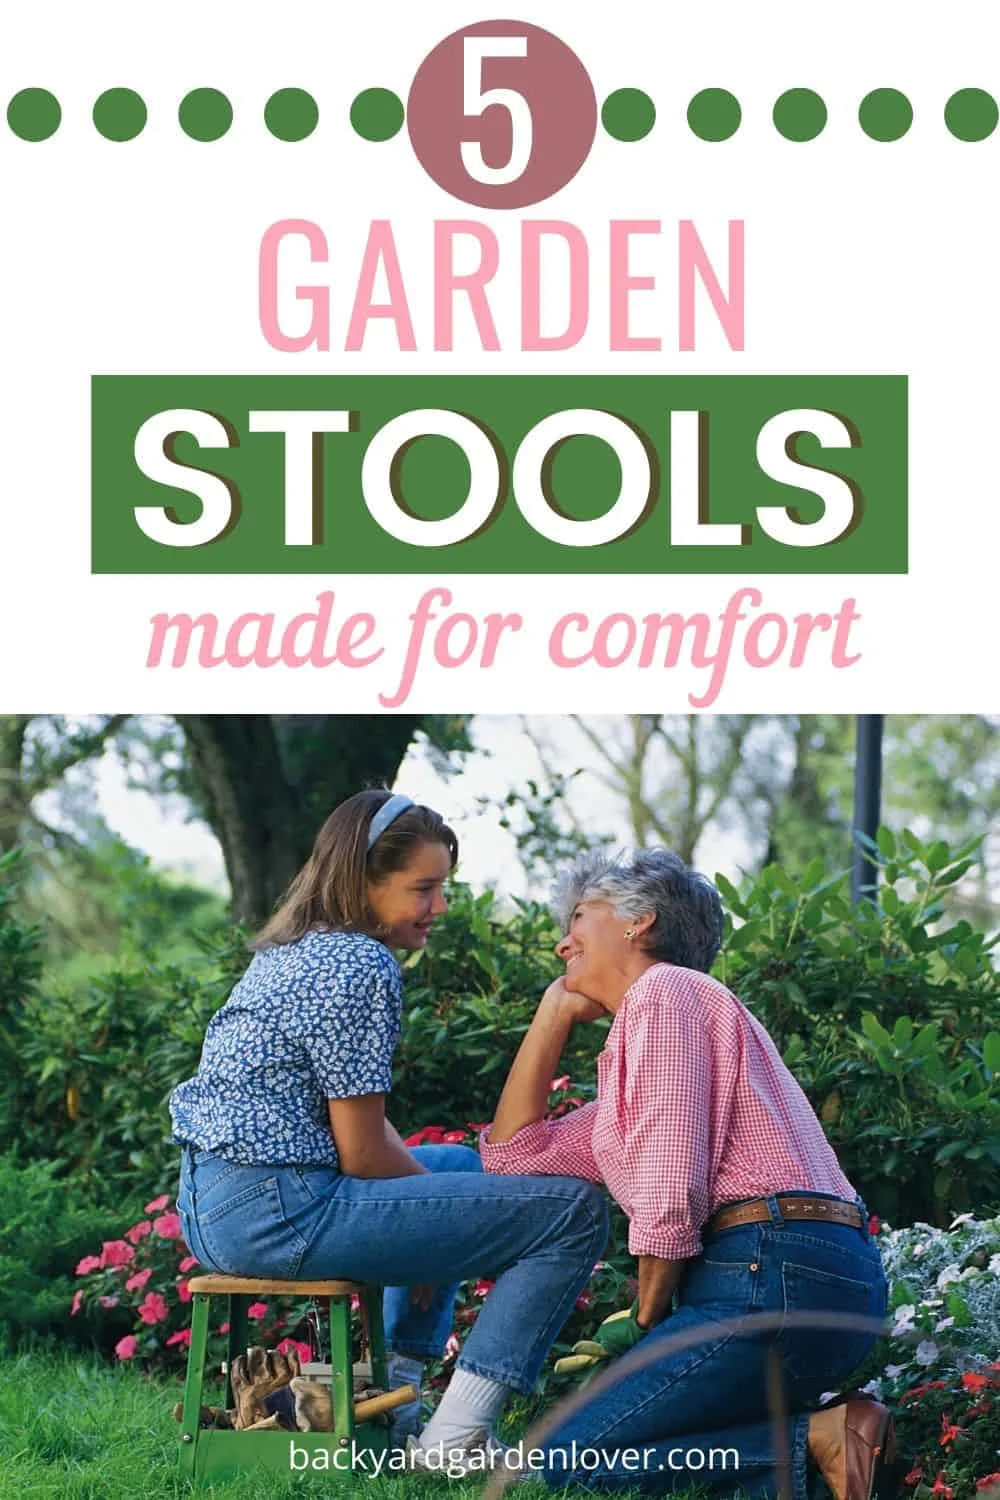 5 garden stools made for comfort